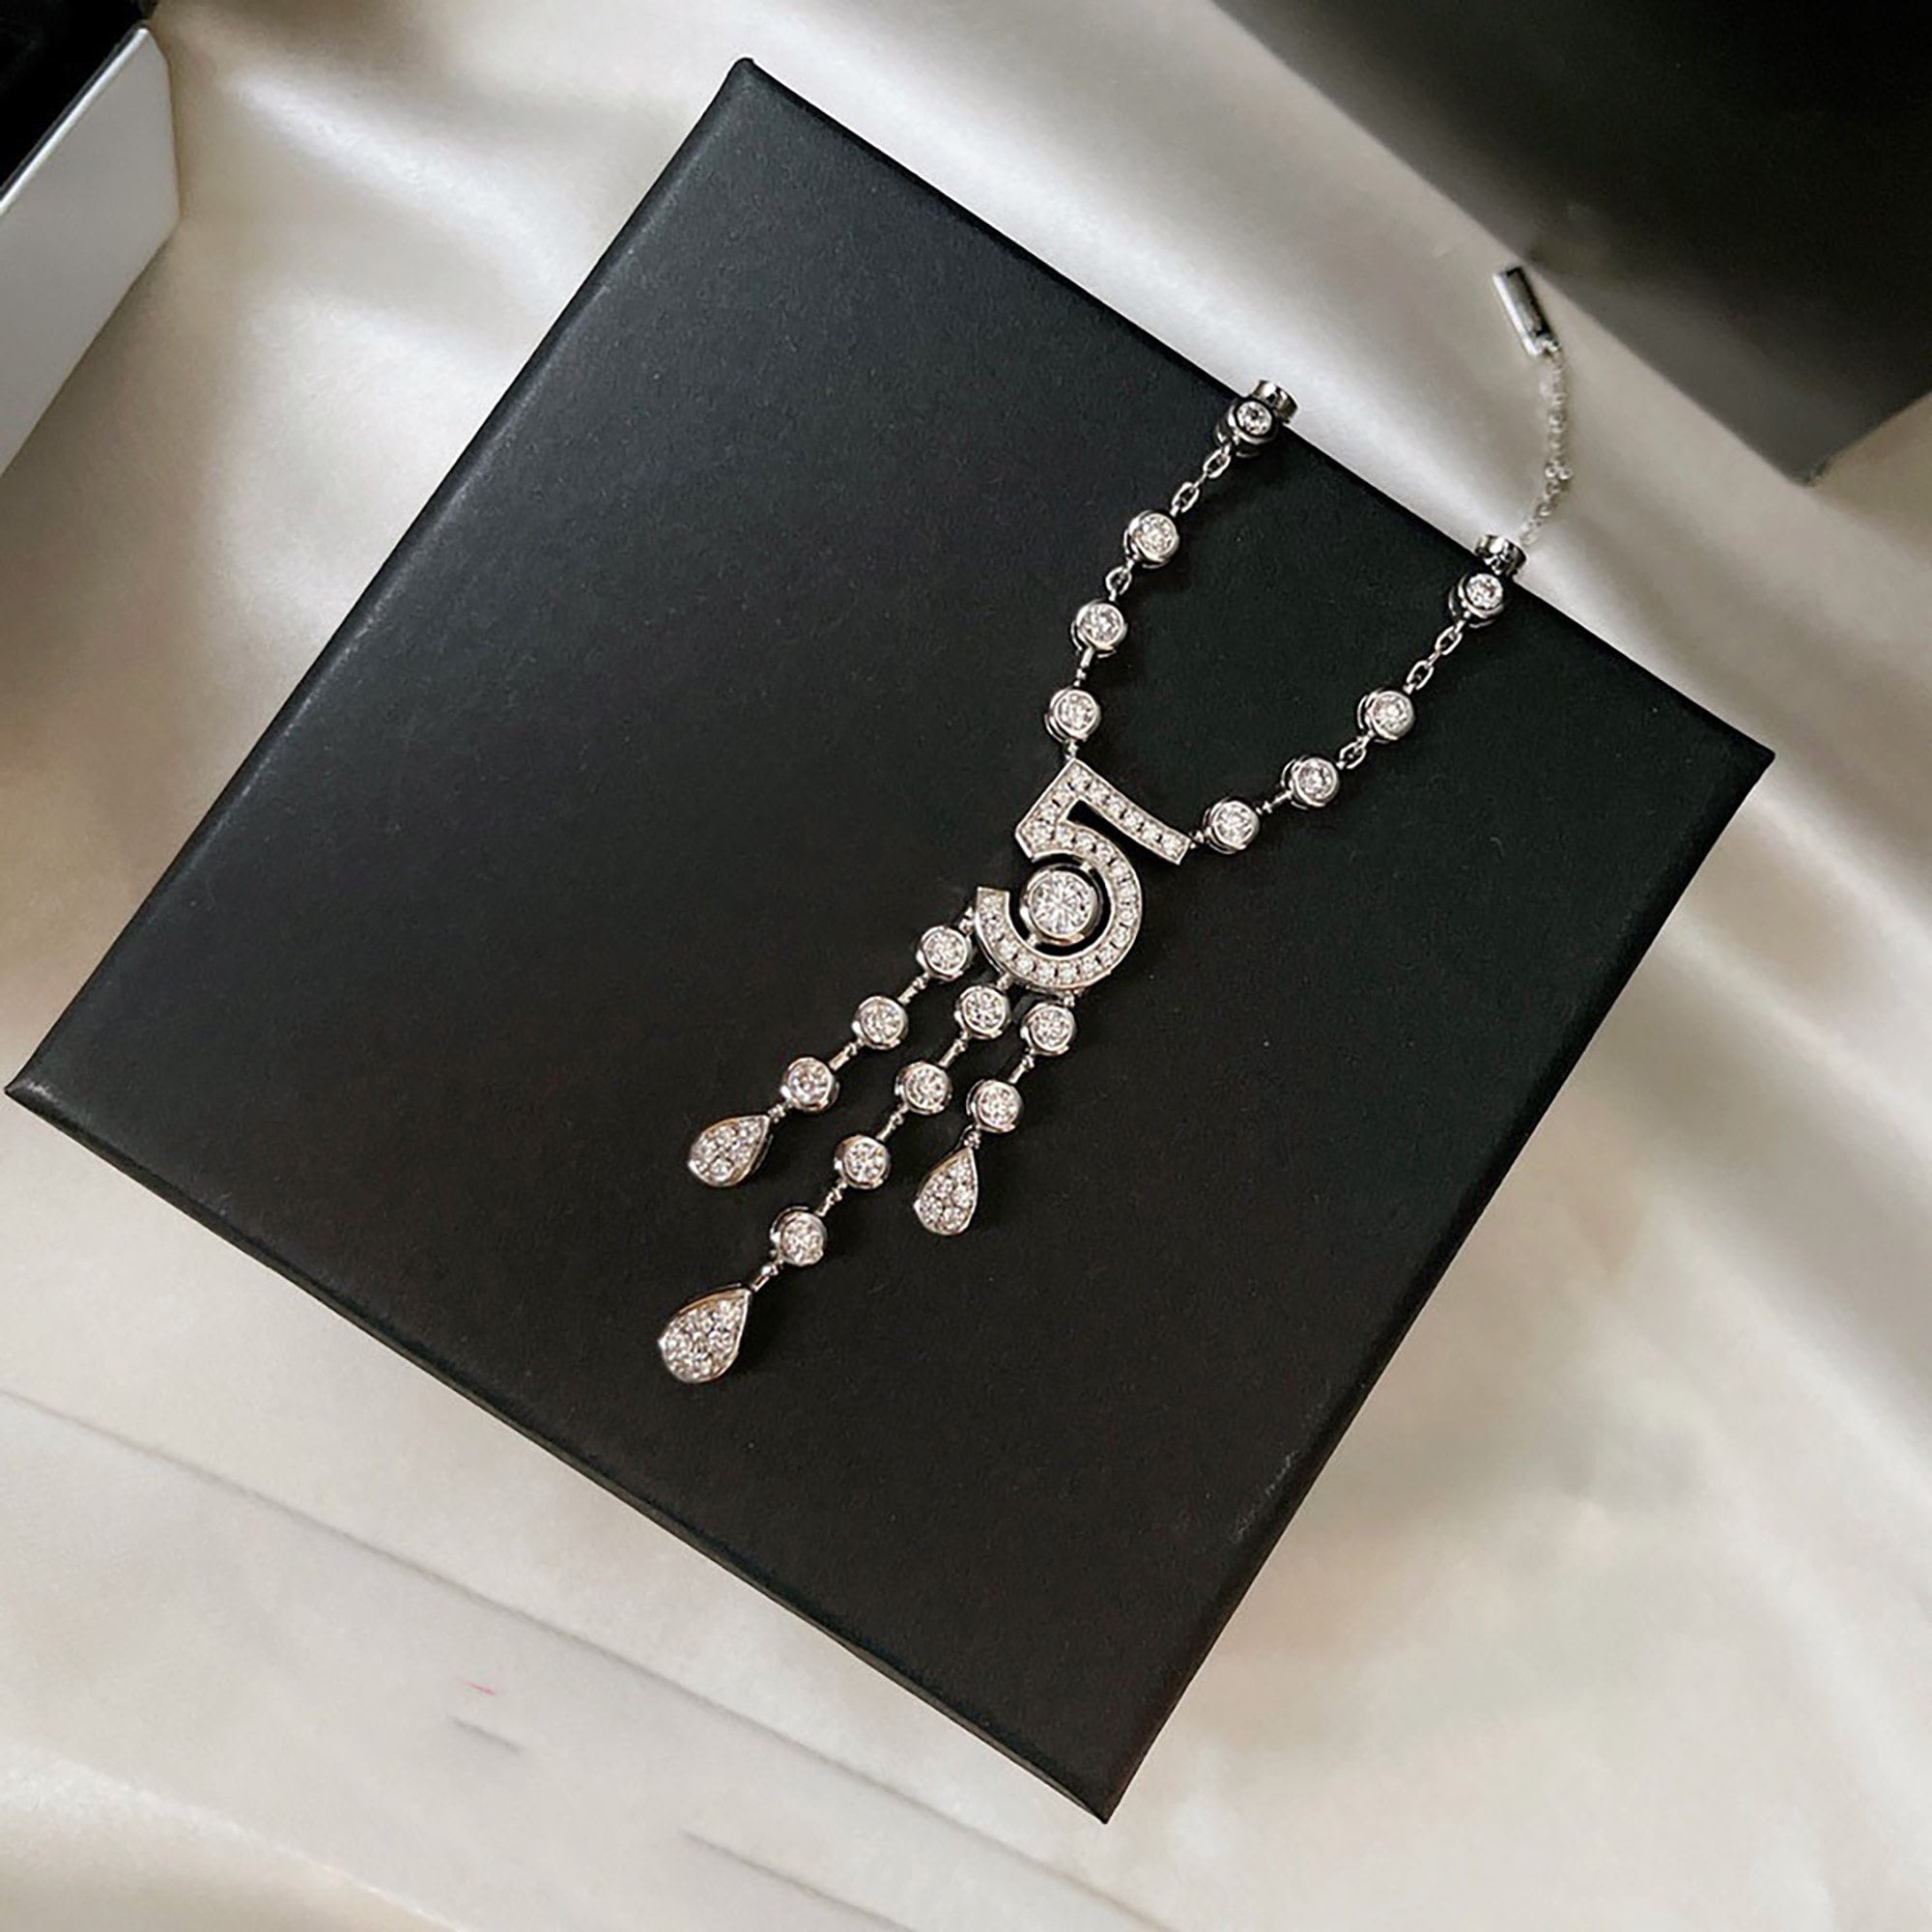 Chanel Necklace AB9582 B10421 NL129, Silver, One Size